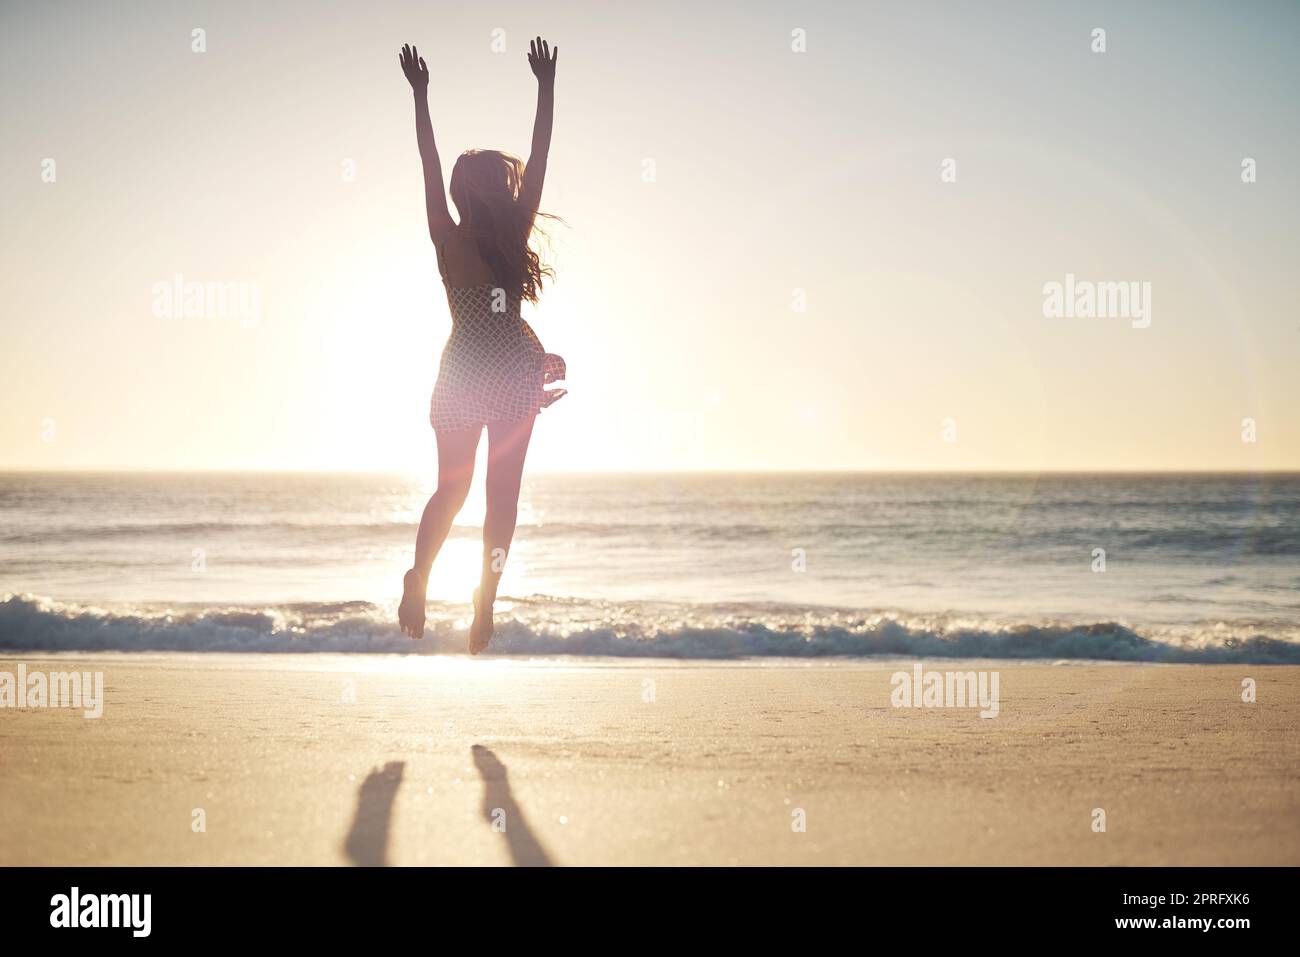 Jump for joy. a young woman jumping into mid air at the beach. Stock Photo